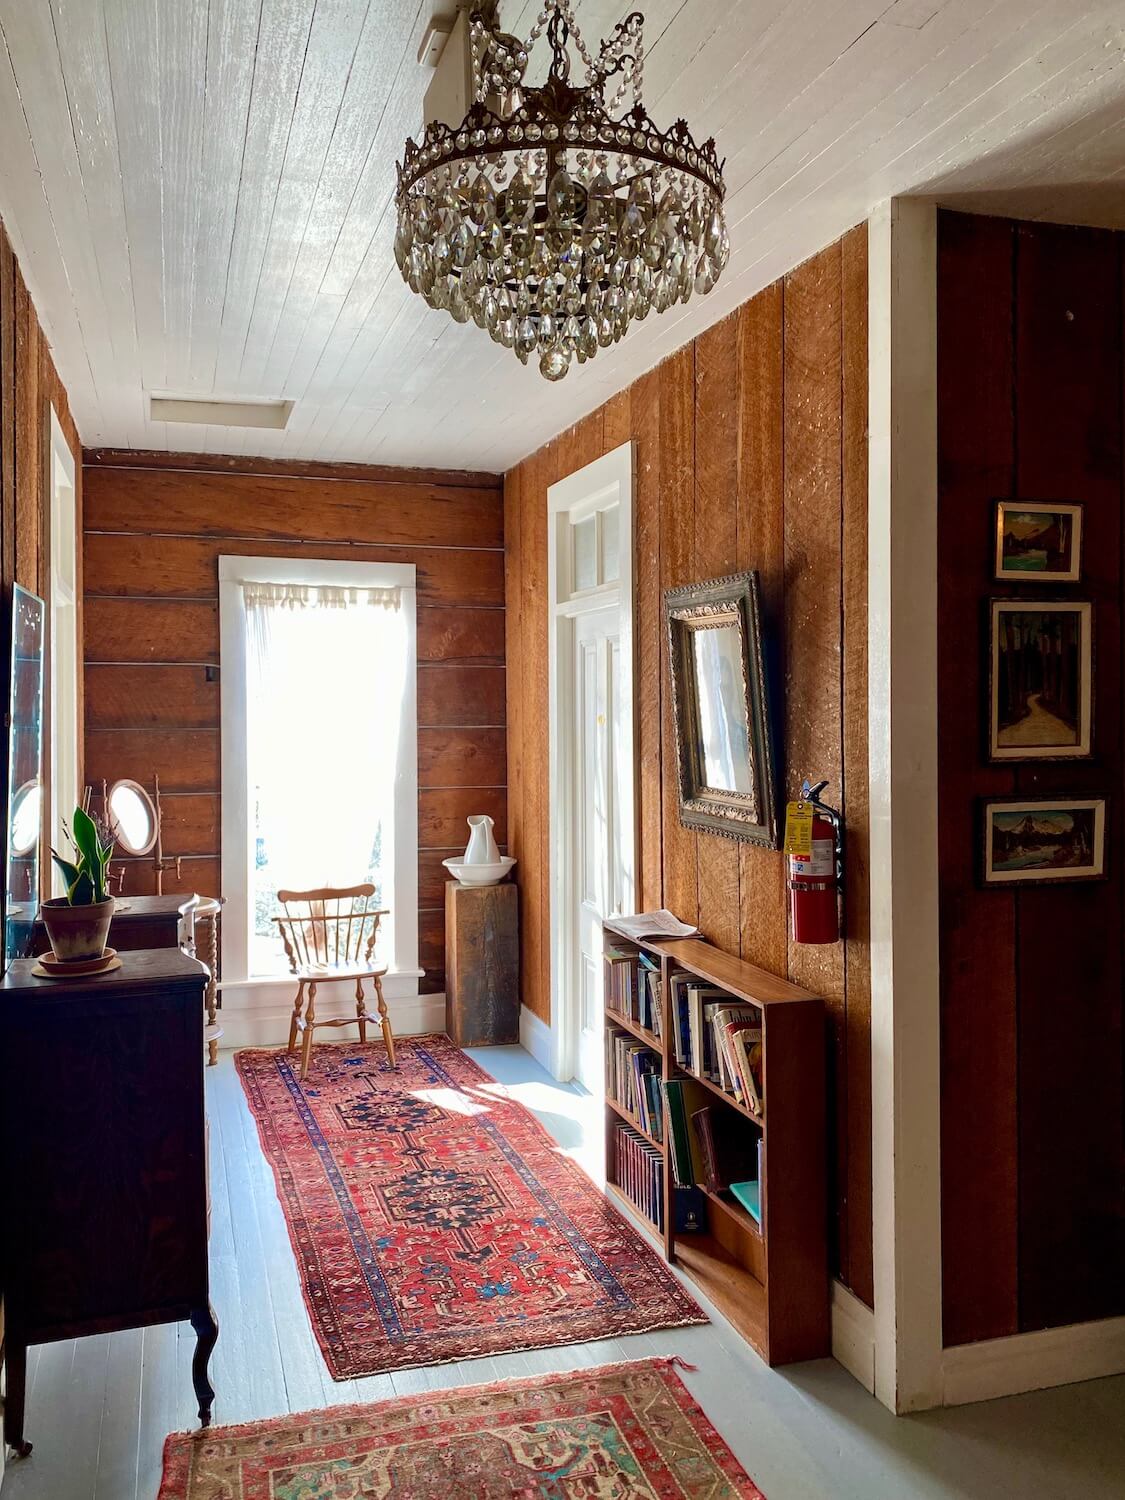 The upstairs hallway of the Tokeland Hotel has walls made from vertical fir boards and white painted ceiling. An ornate crystal chandelier hands in the crossing of two hallways and there are assorted antique furniture pieces. There are two oriental rugs on the floor and bright light emitting from the outside.